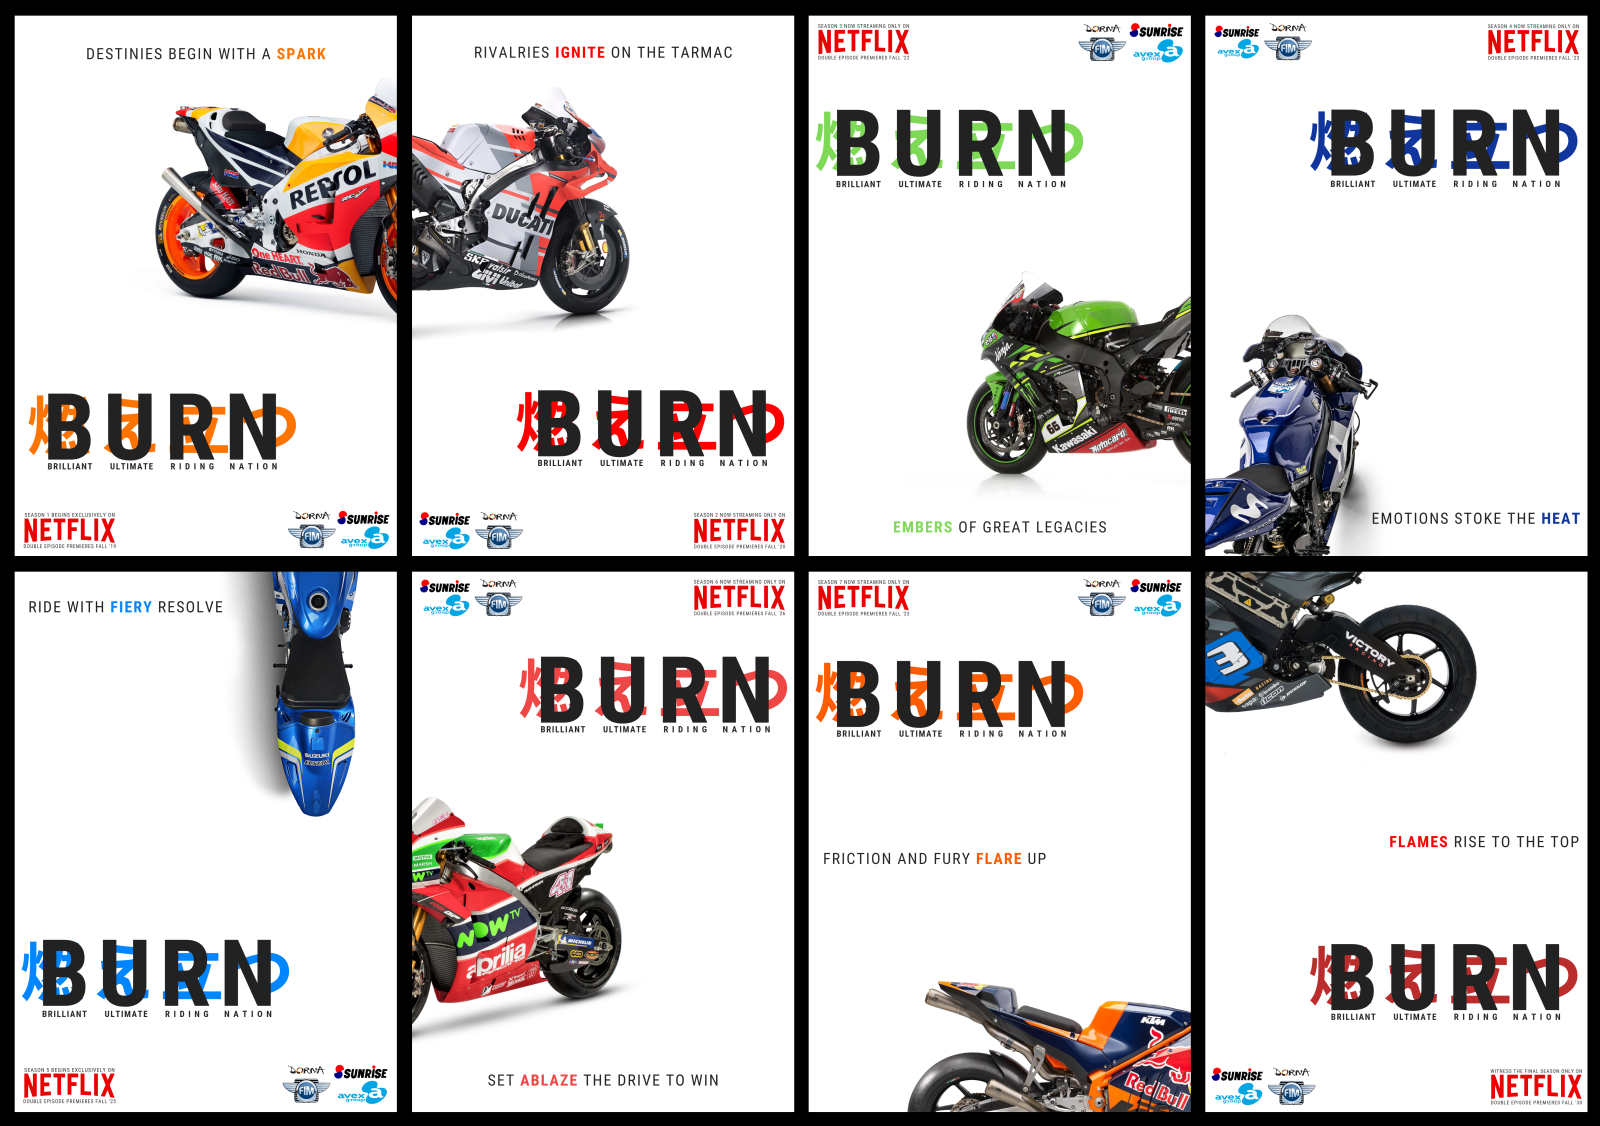 I have since updated my season pitch to include two extra seasons (more below), which means two new posters—denoted by the Aprilia and KTM bikes seen in the second row. I’ll share these posters on social media with additional disclaimers. Posters are OC; photos of bikes from the media archives of the teams shown.